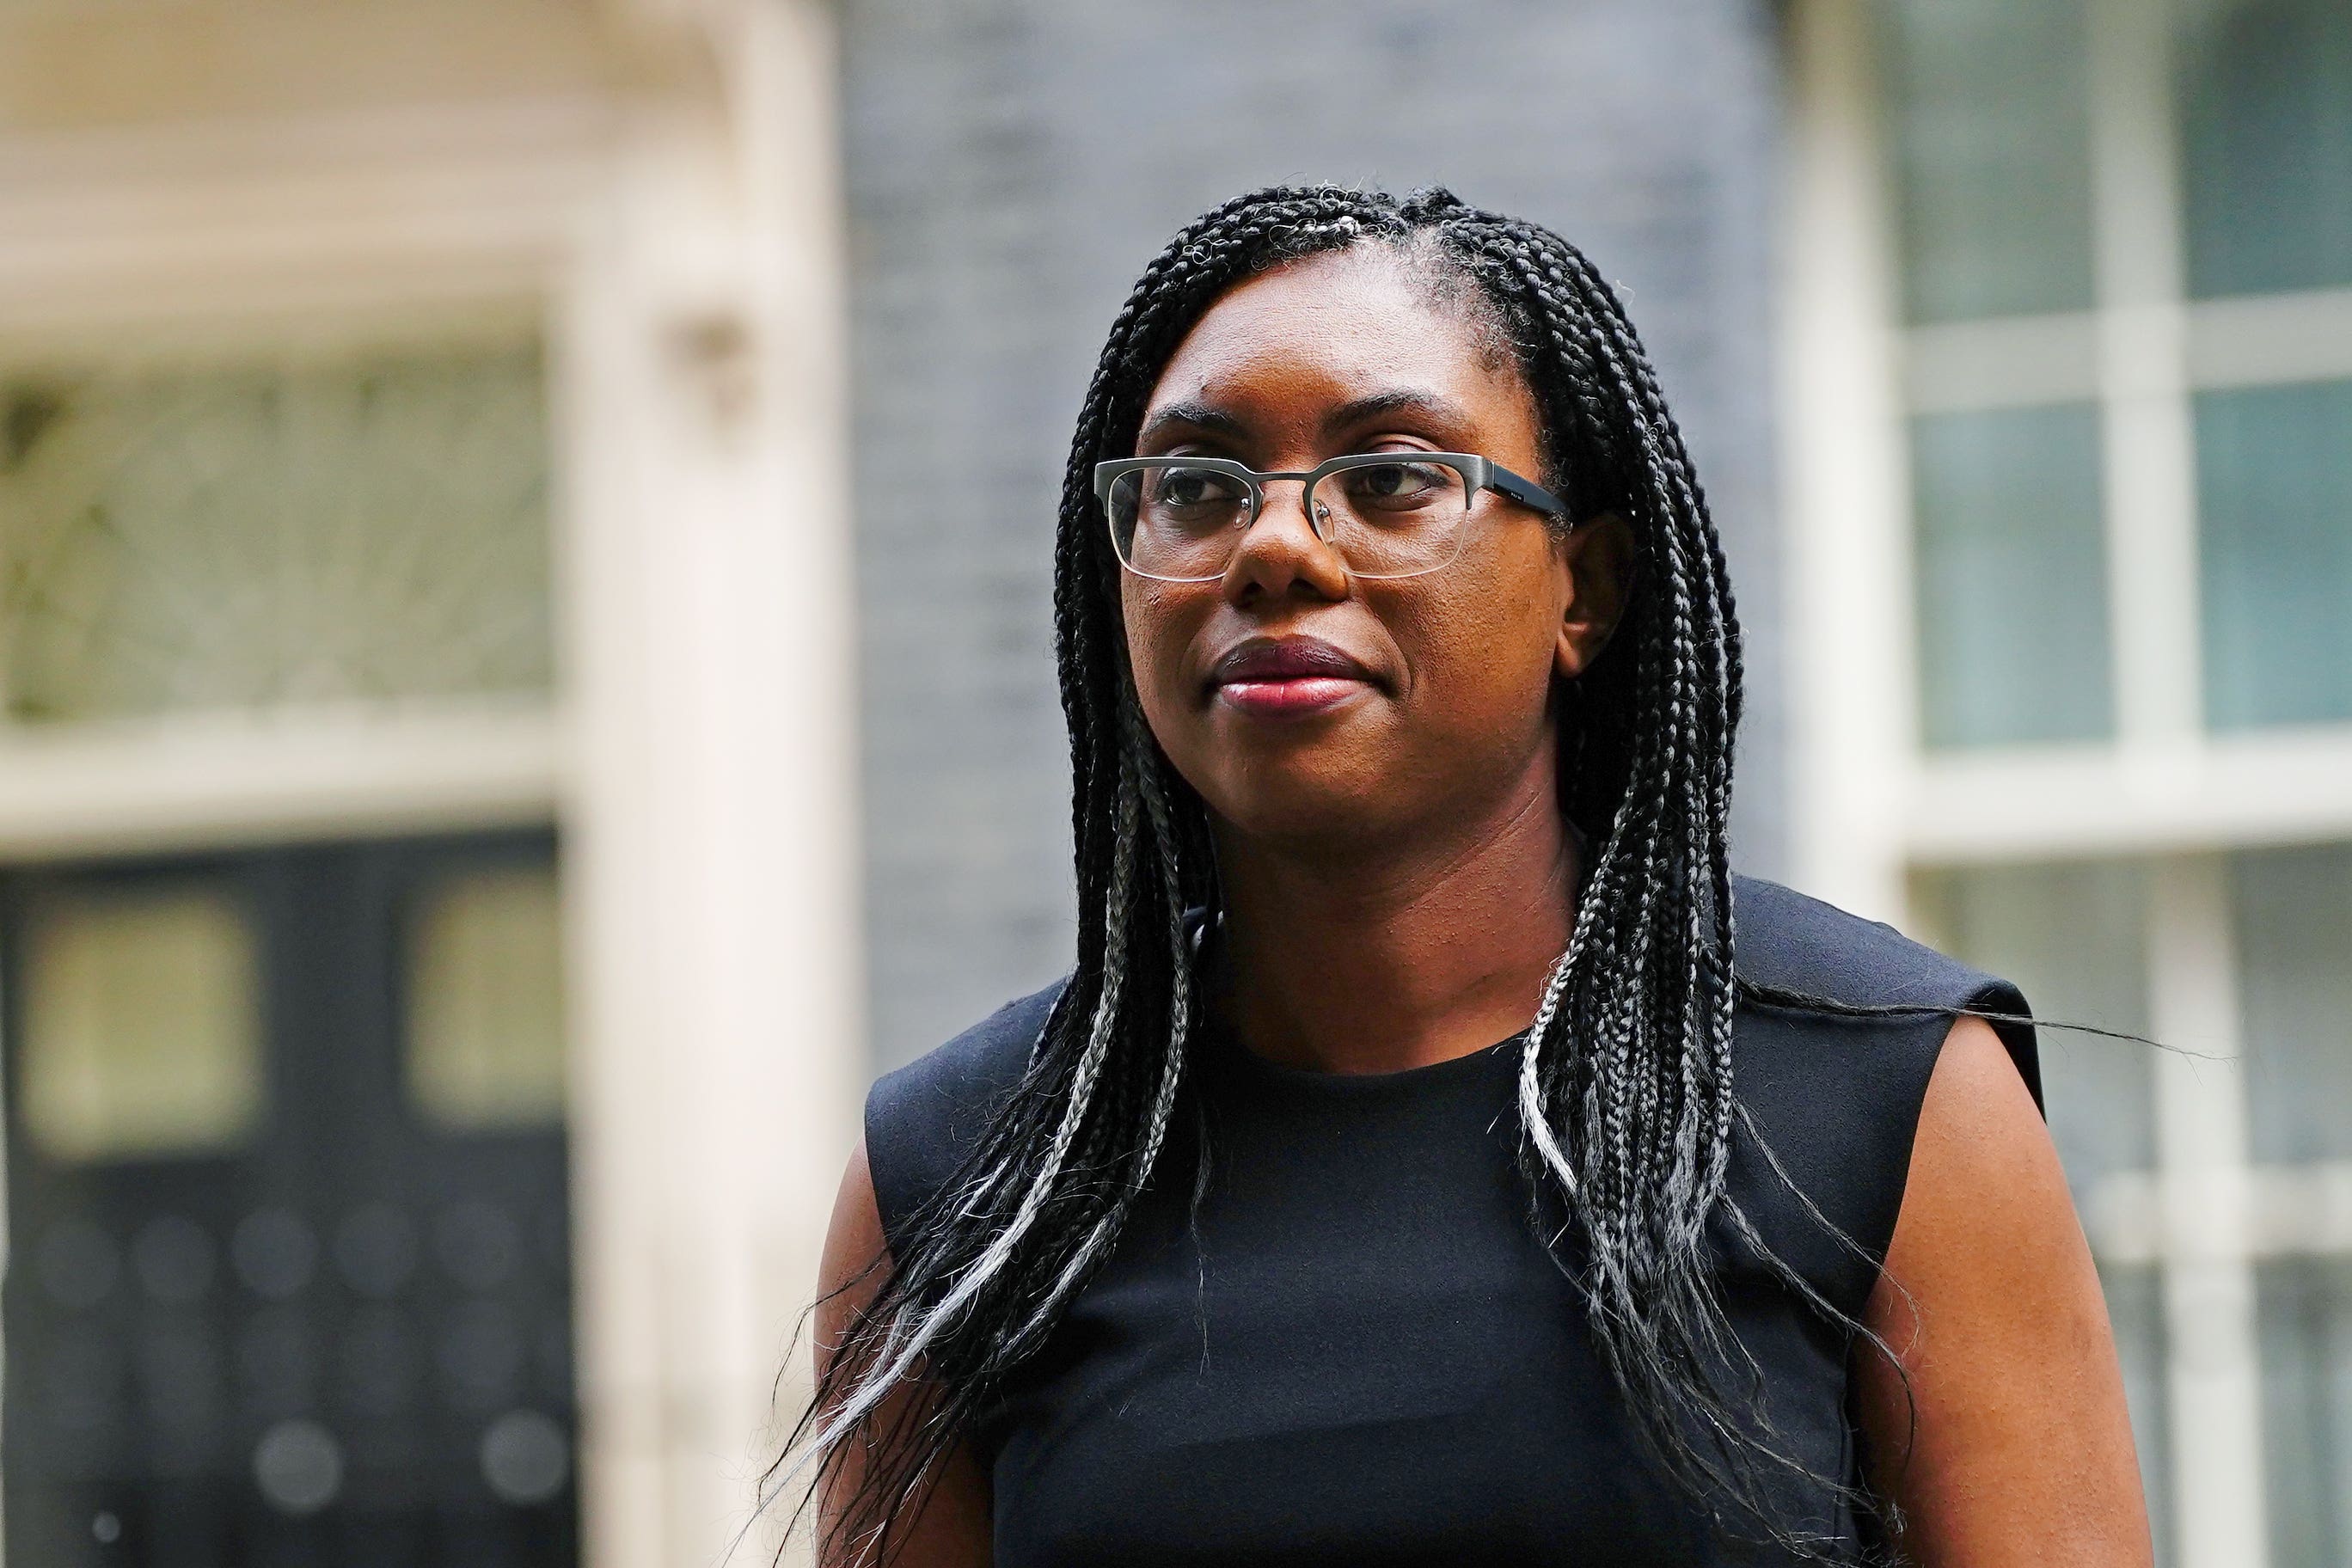 Kemi Badenoch is the government’s equalities minister